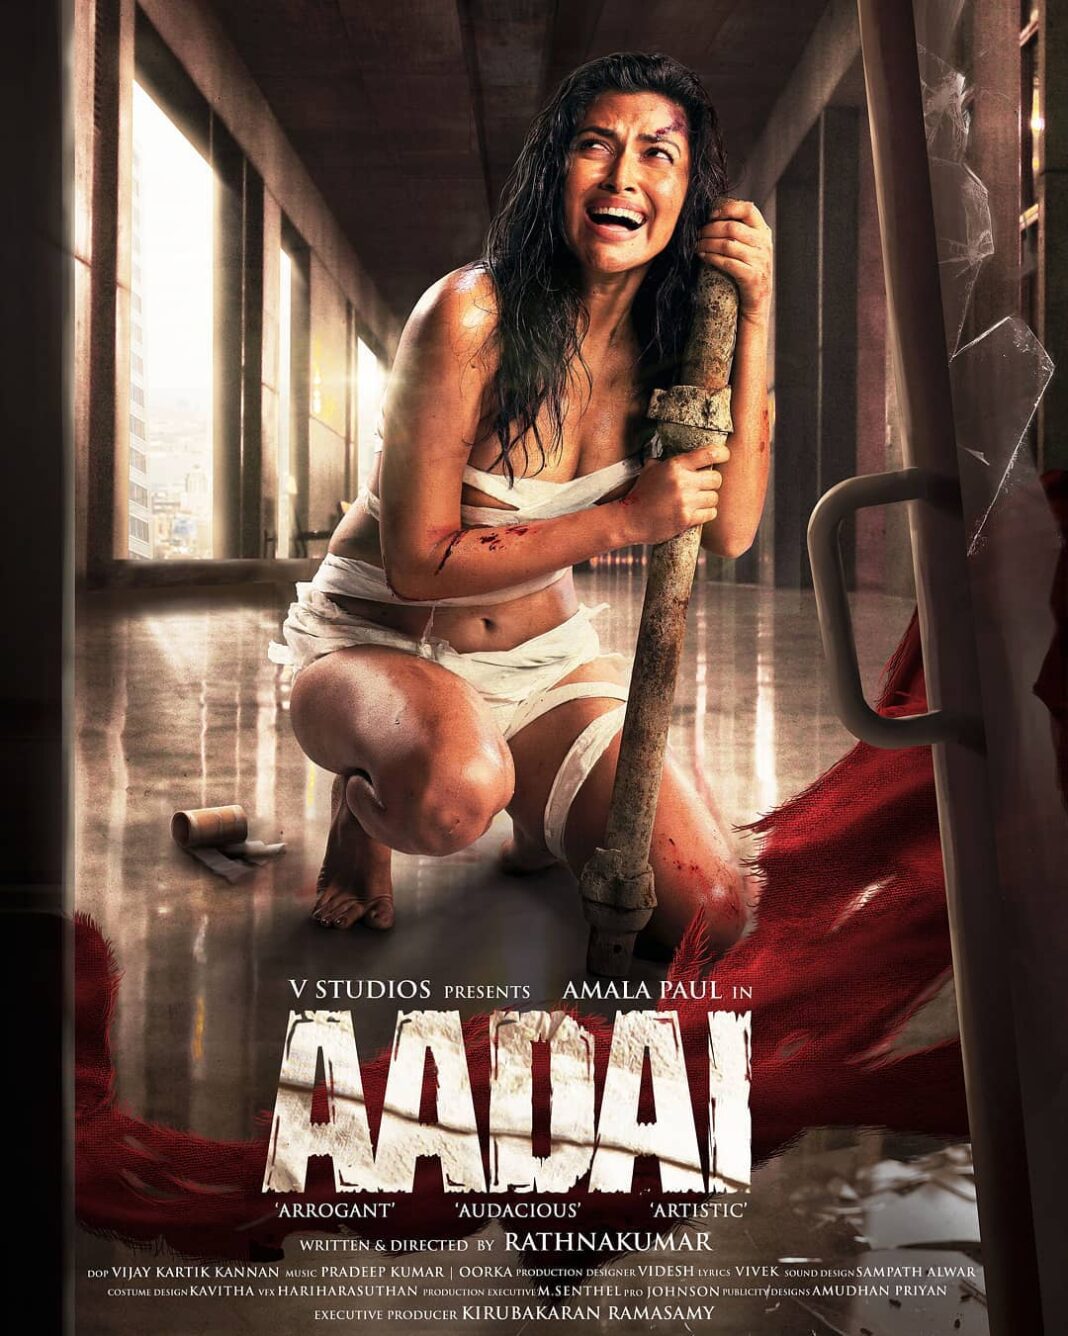 Amala Paul Instagram - Here is the 1st Look of my next Arrogant, Audacious and Artistic Tamil film 